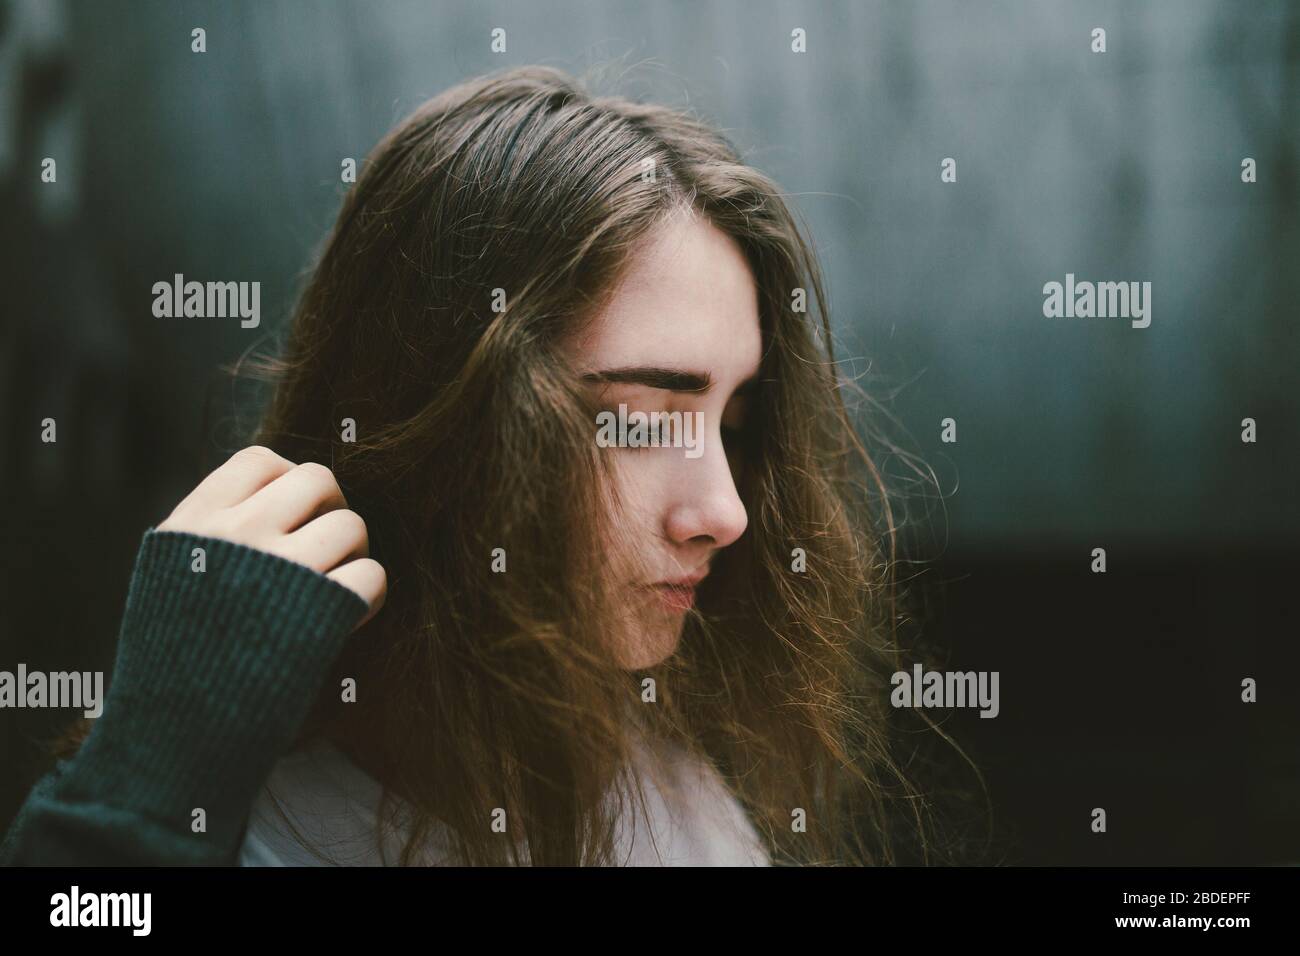 Young woman with brown hair Stock Photo